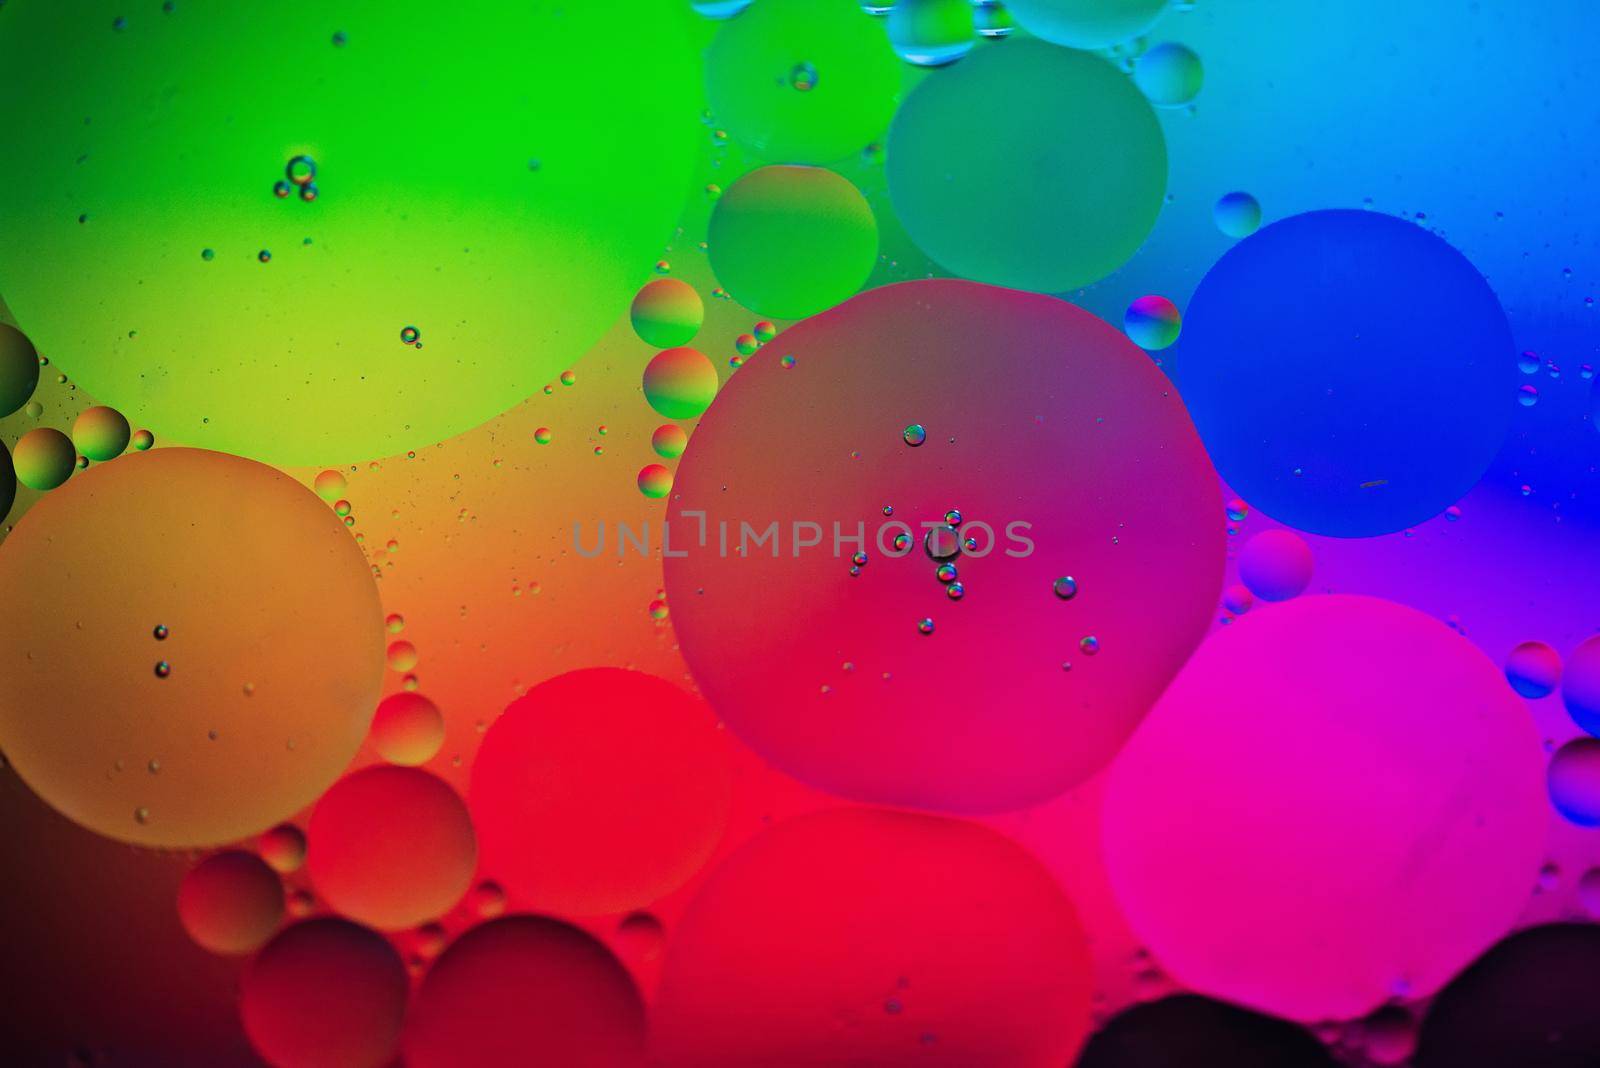 Rainbow abstract background picture made with oil, water and soap by anytka